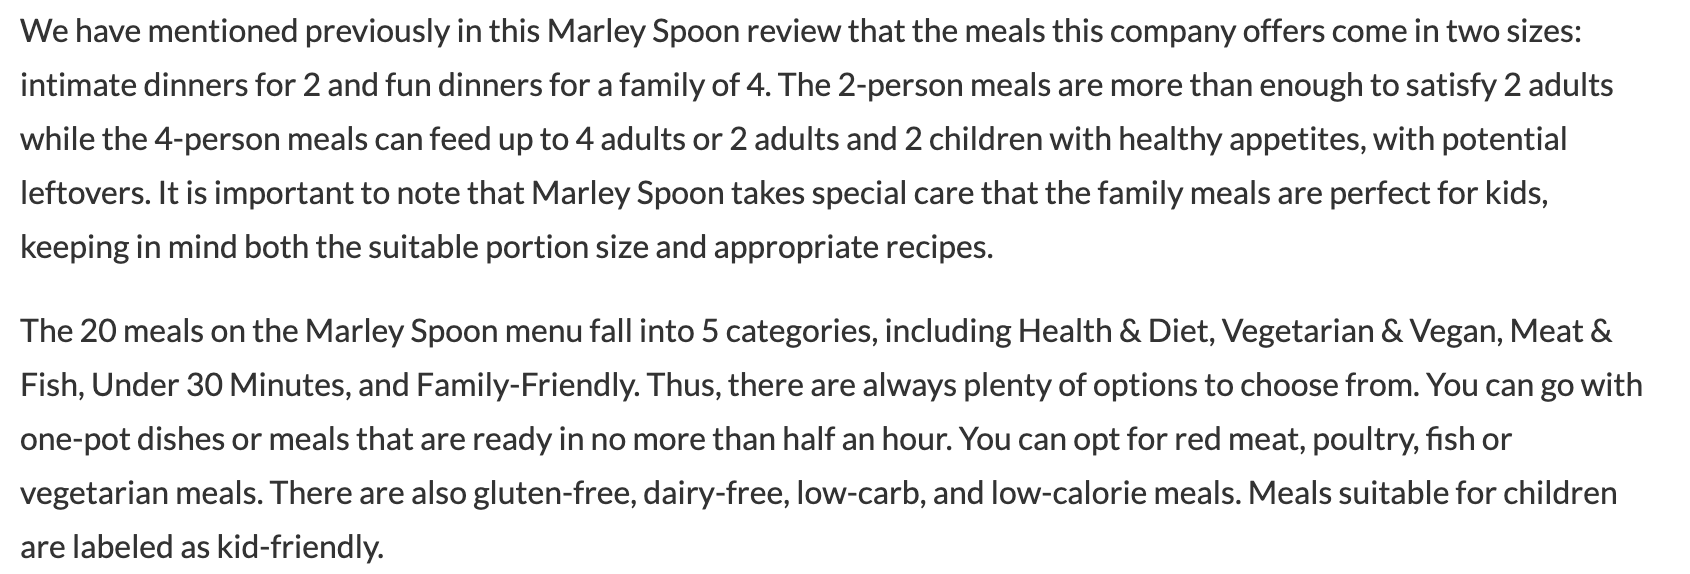 Marley Spoon Sample Dishes